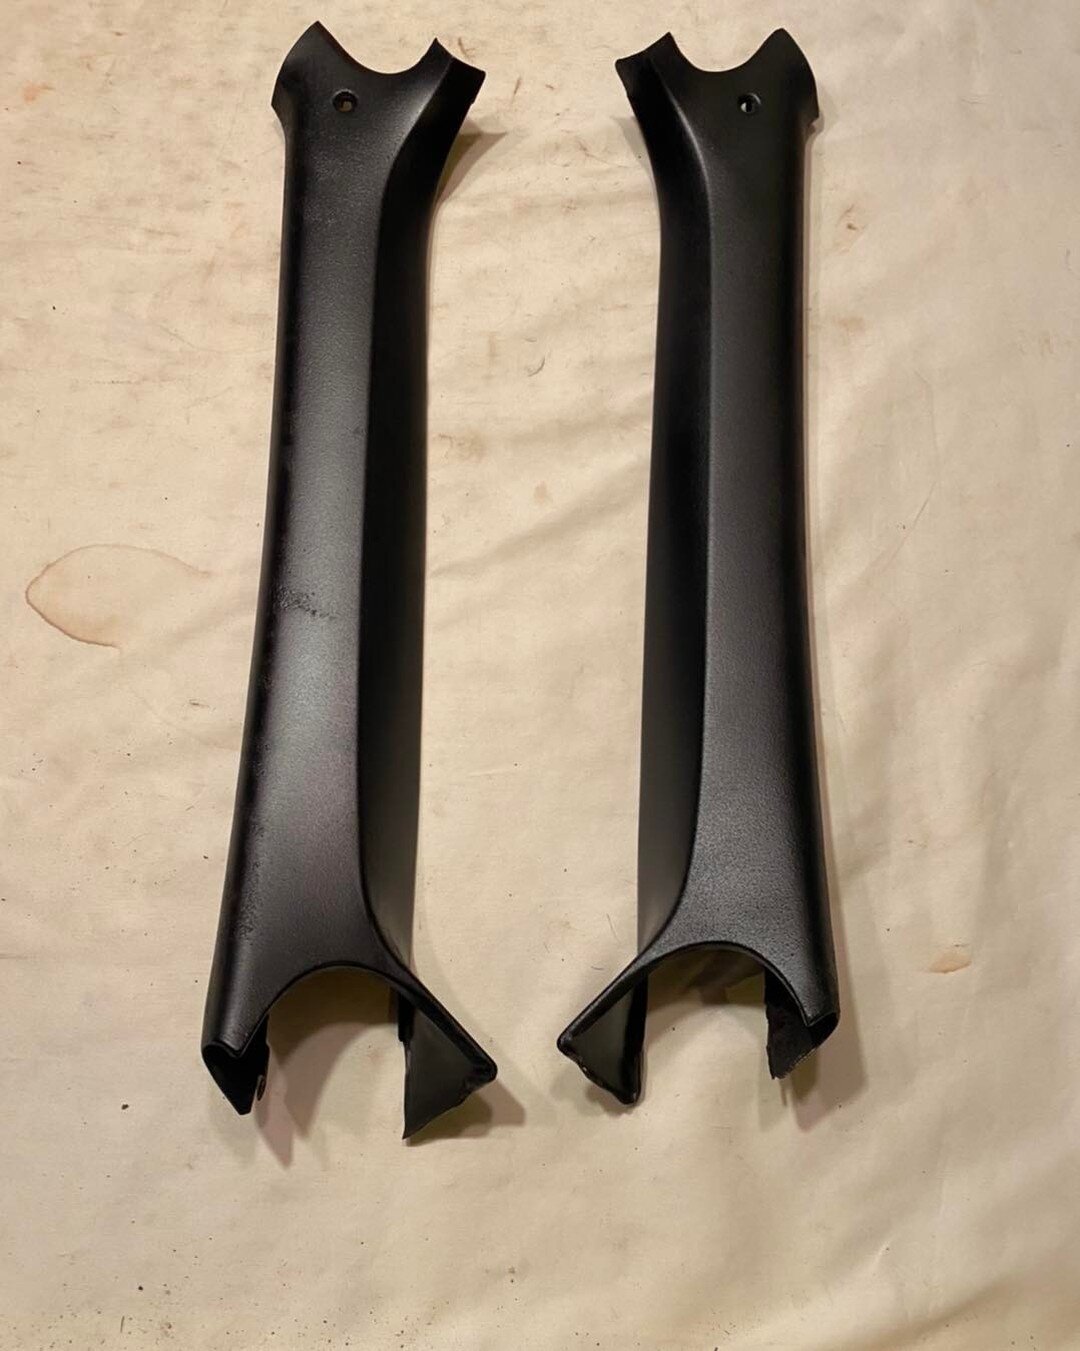 70-73 Camaro Firebird Trans Am front A- pillar Trim- covers. These are metal. They are originals in good shape. They will need to be blasted and repainted to match your interior. 

$165 shipped to your door (in the lower 48)